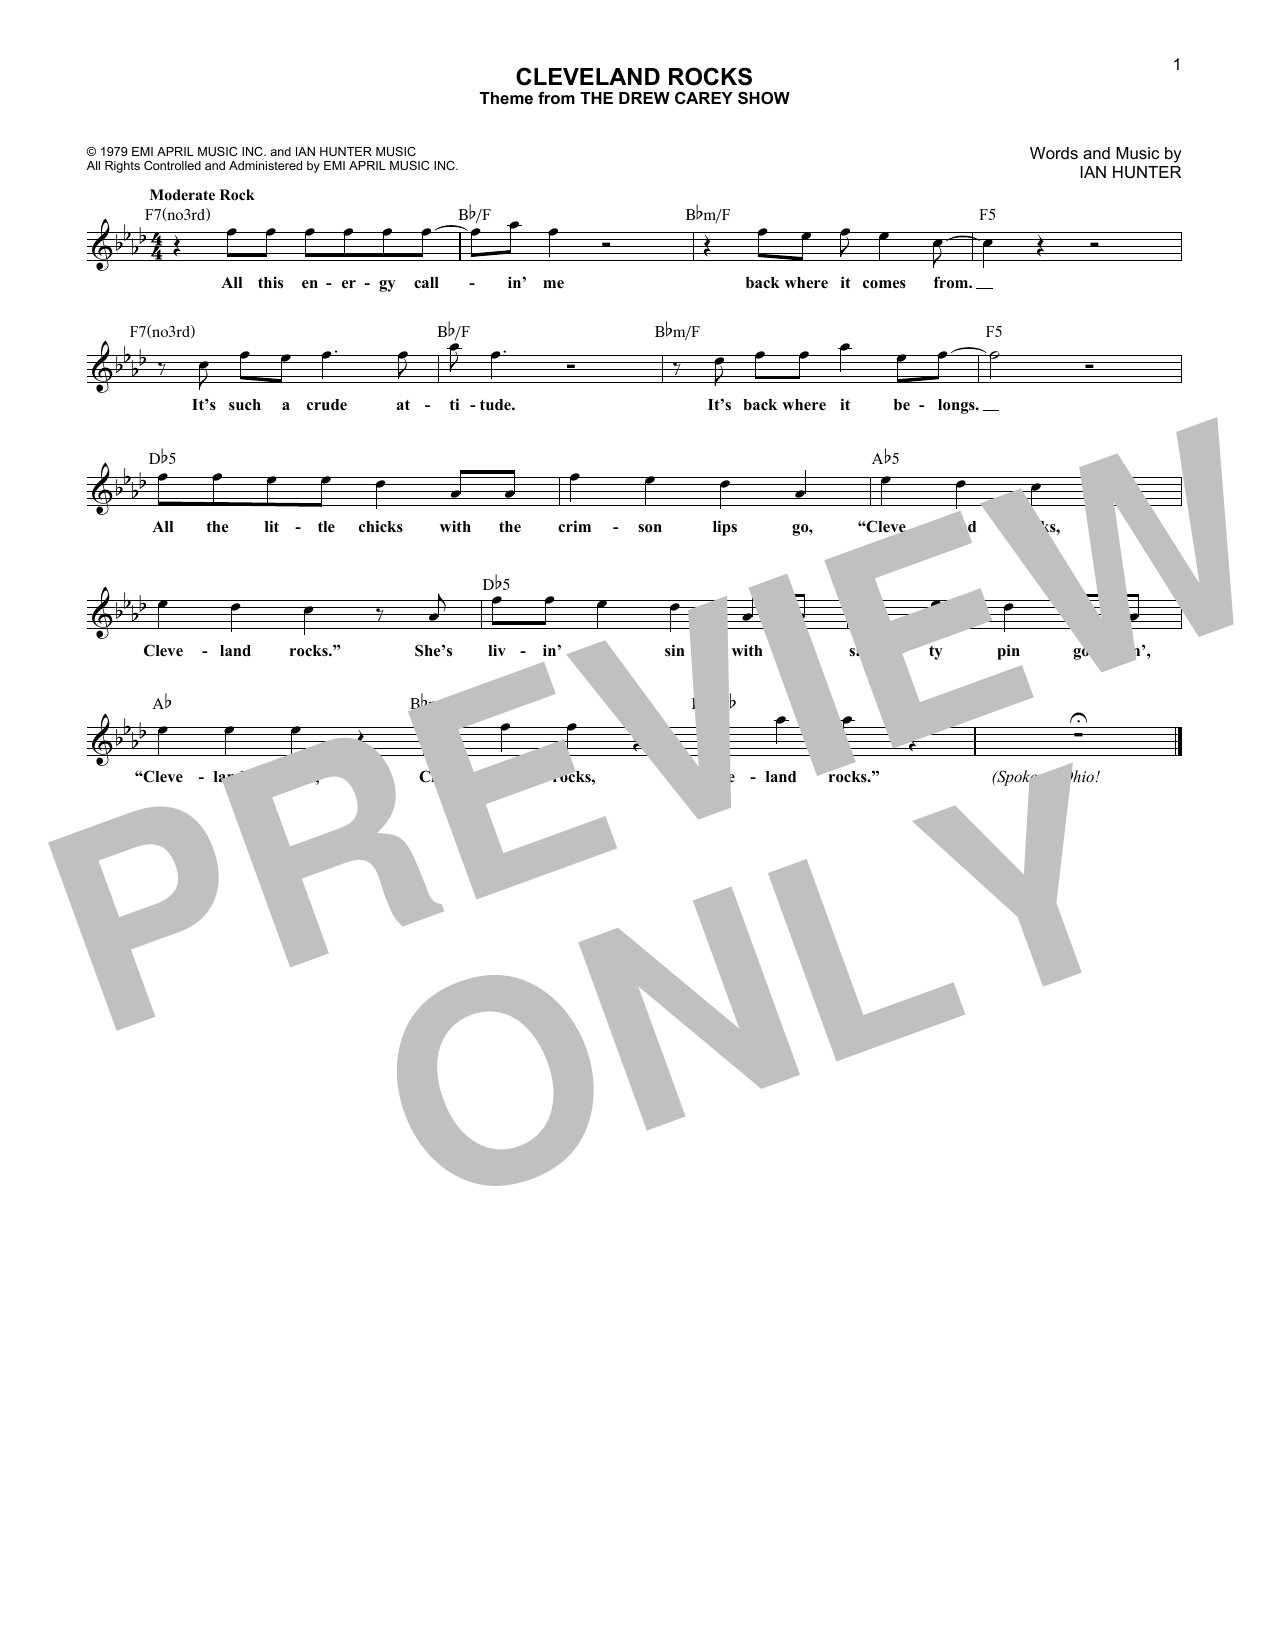 Download Presidents Of The United States Of A Cleveland Rocks Sheet Music